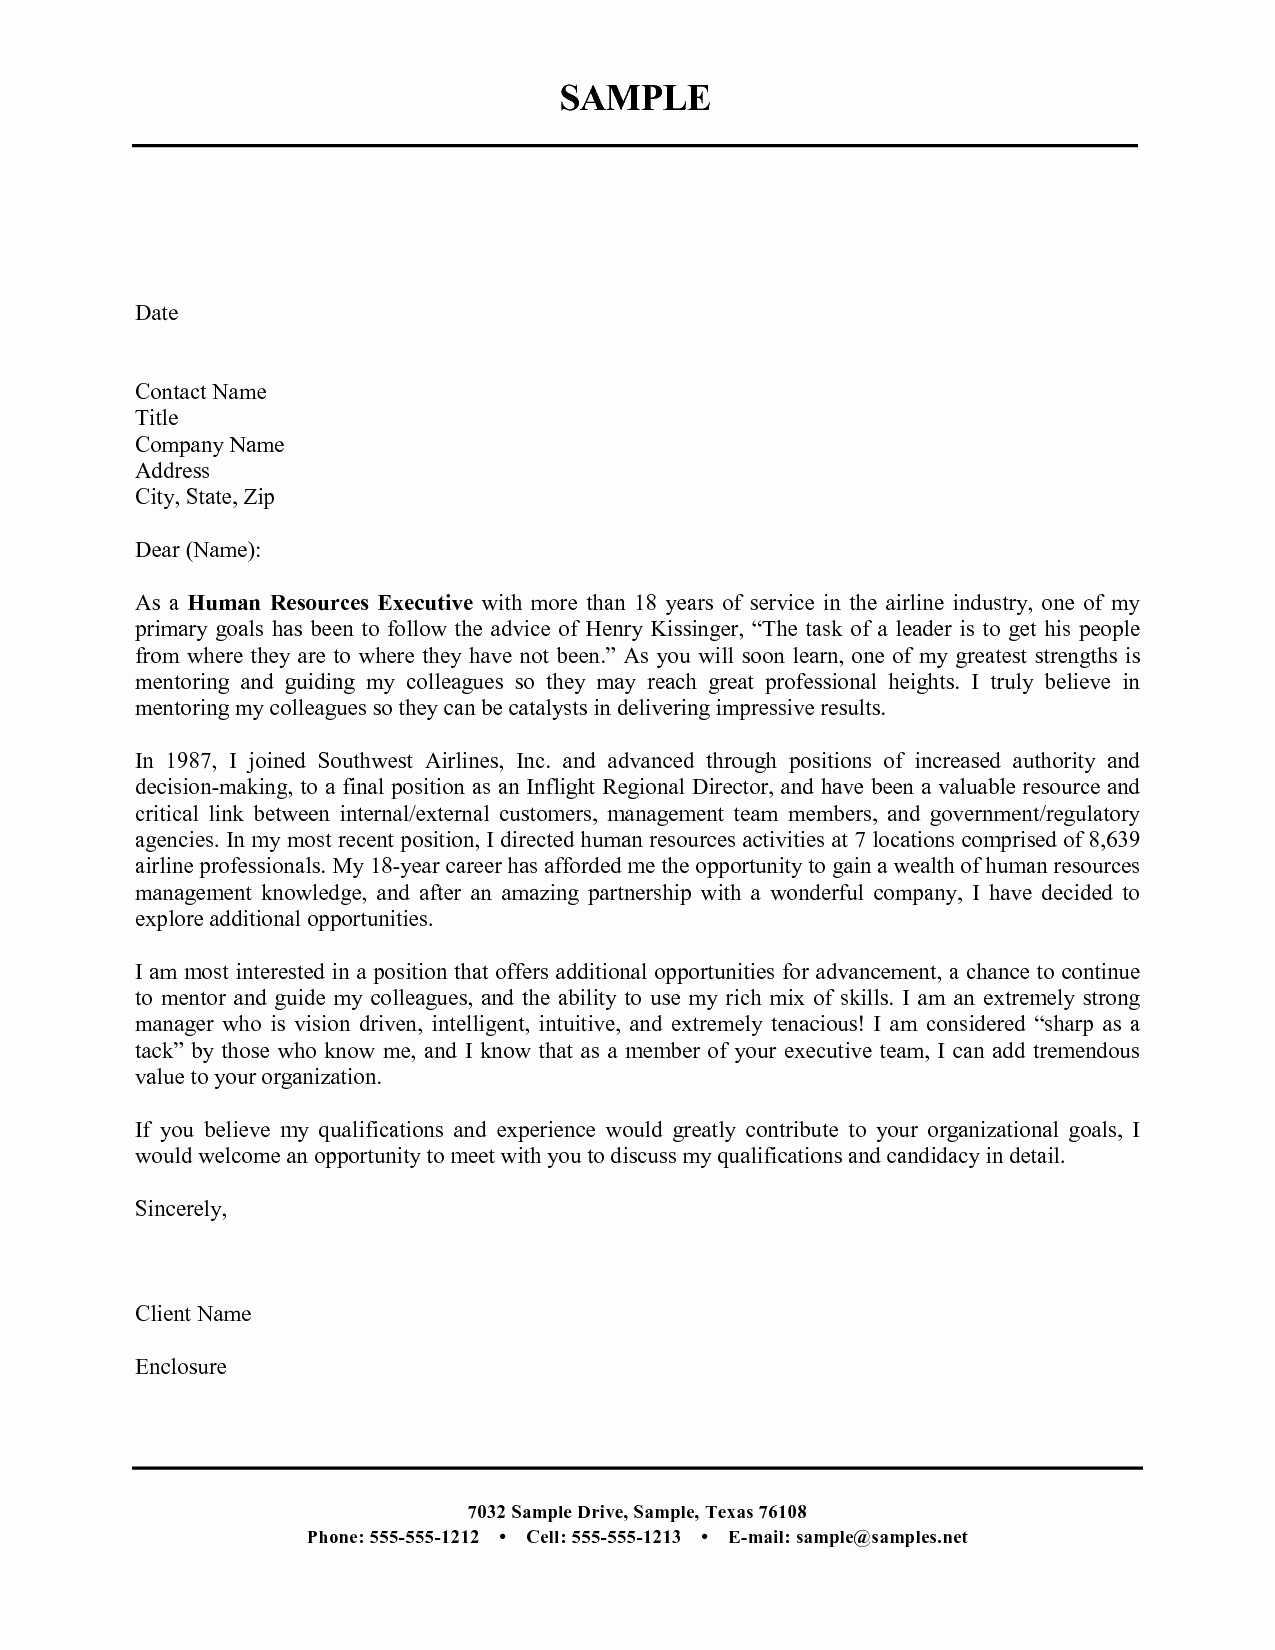 Formal Letter Template Microsoft Word Awesome Cover Letter Template Word Document Microsoft Word Cover